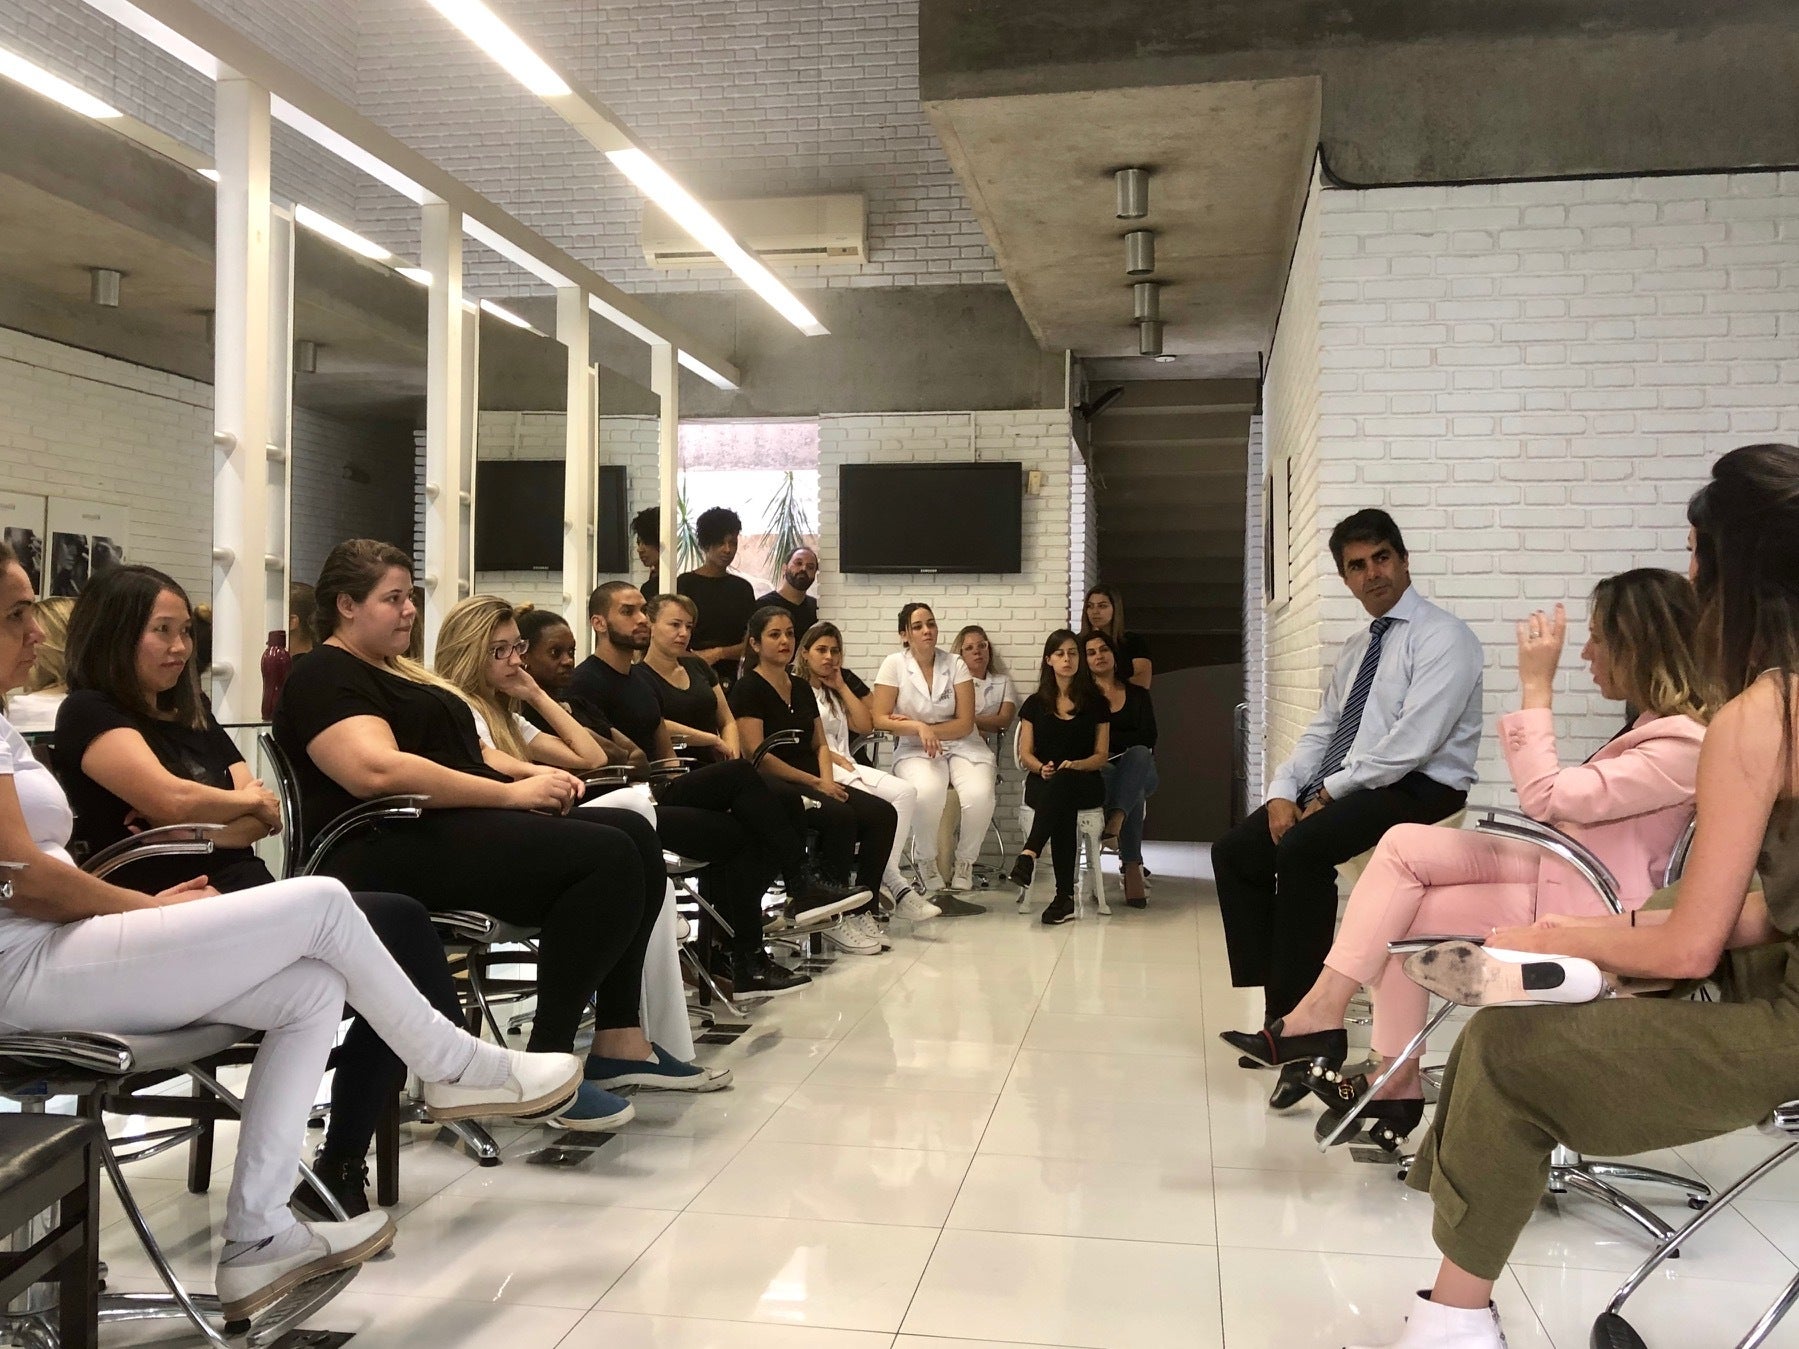 Beauticians from Jacques Janine, a high end salon in São Paulo, being trained to stop domestic violence